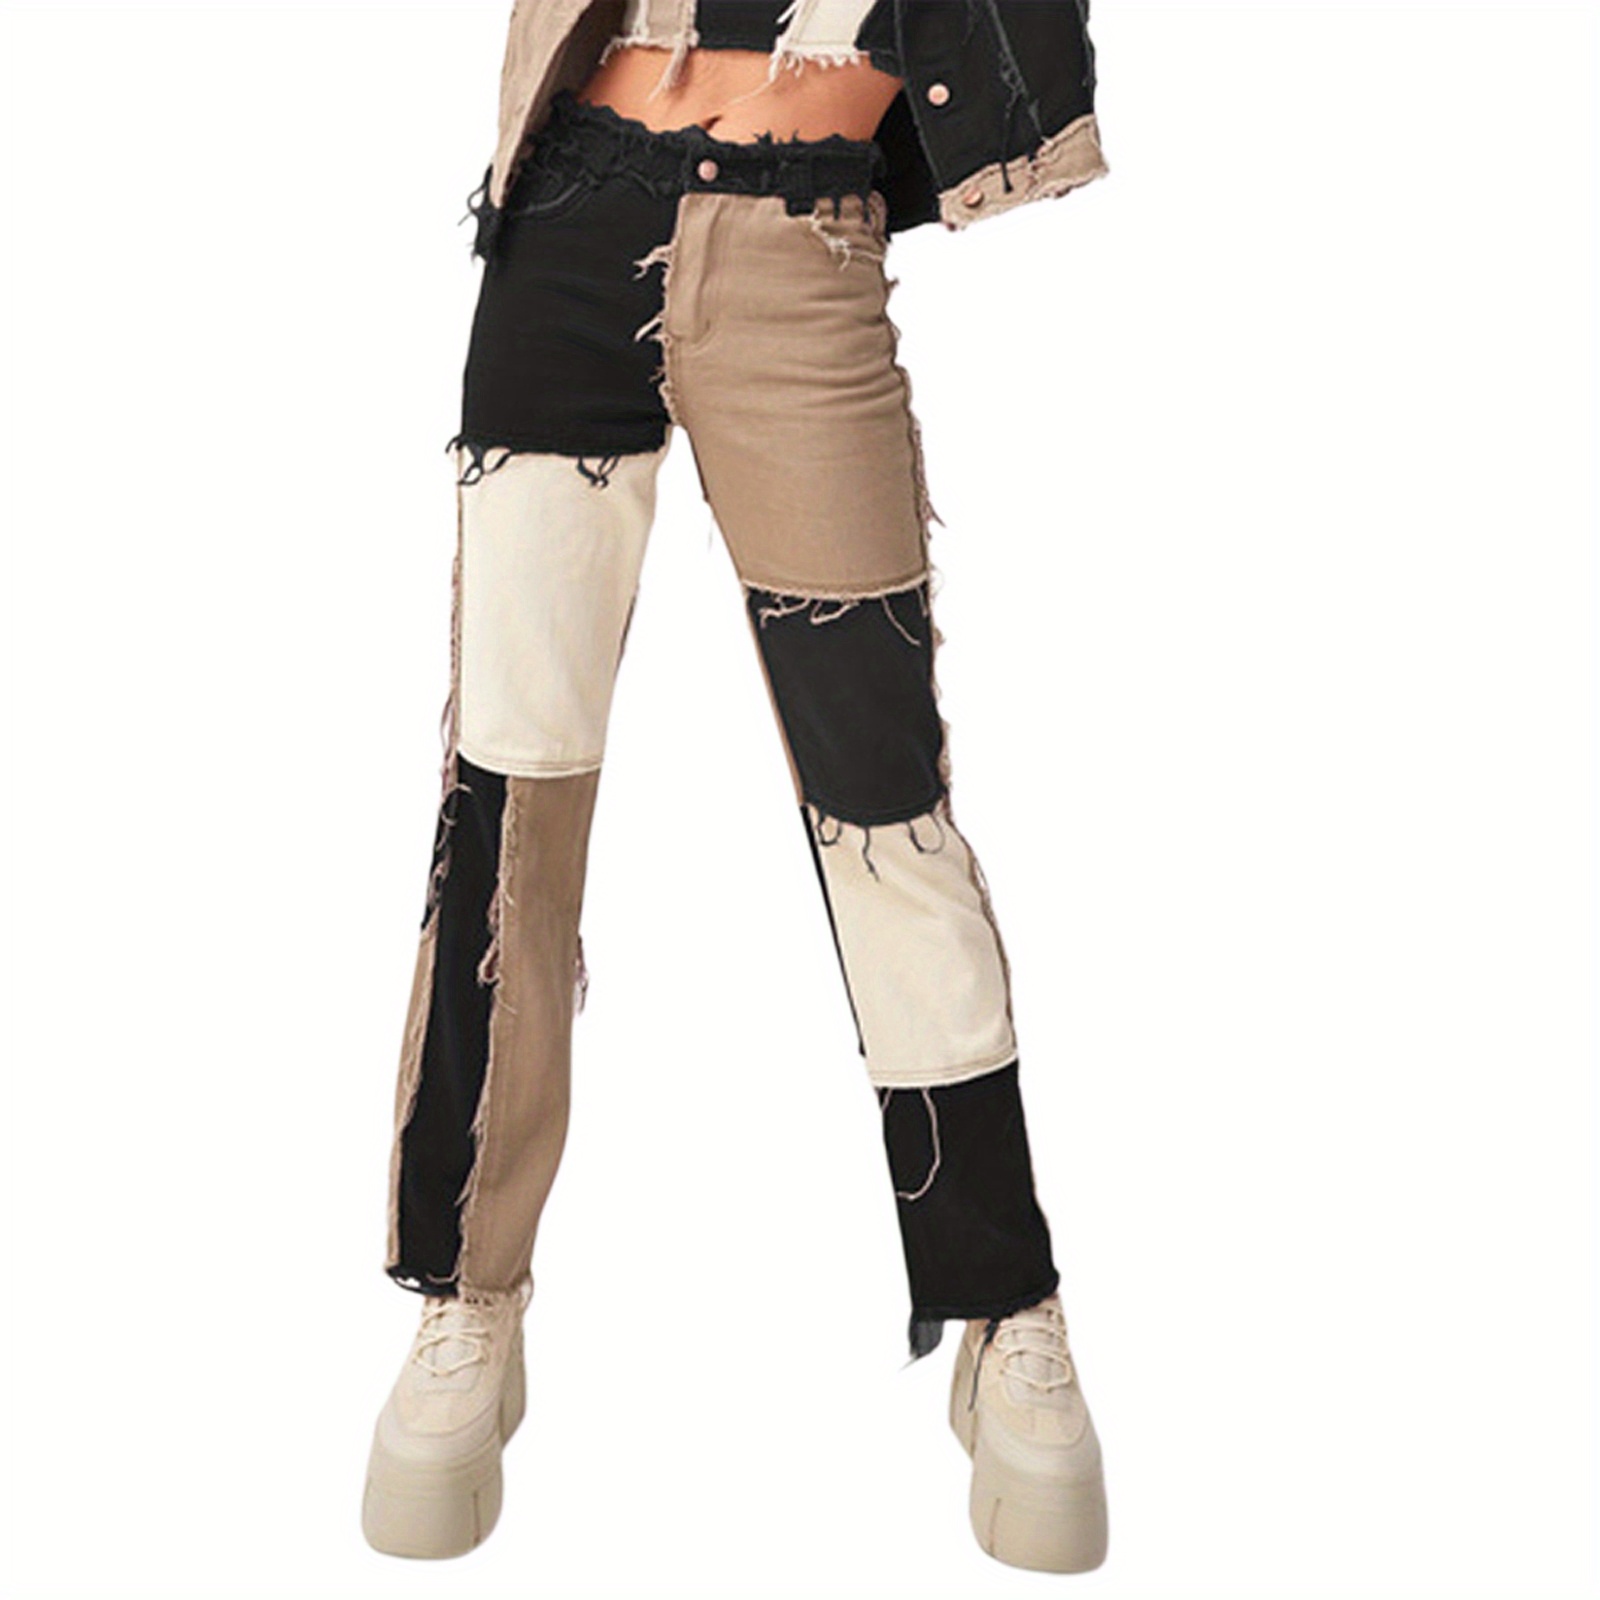 

Women's High-waist Straight Leg Jeans, Casual Color Block Patchwork Raw Trim Stitching, Full-length Pants With Pockets